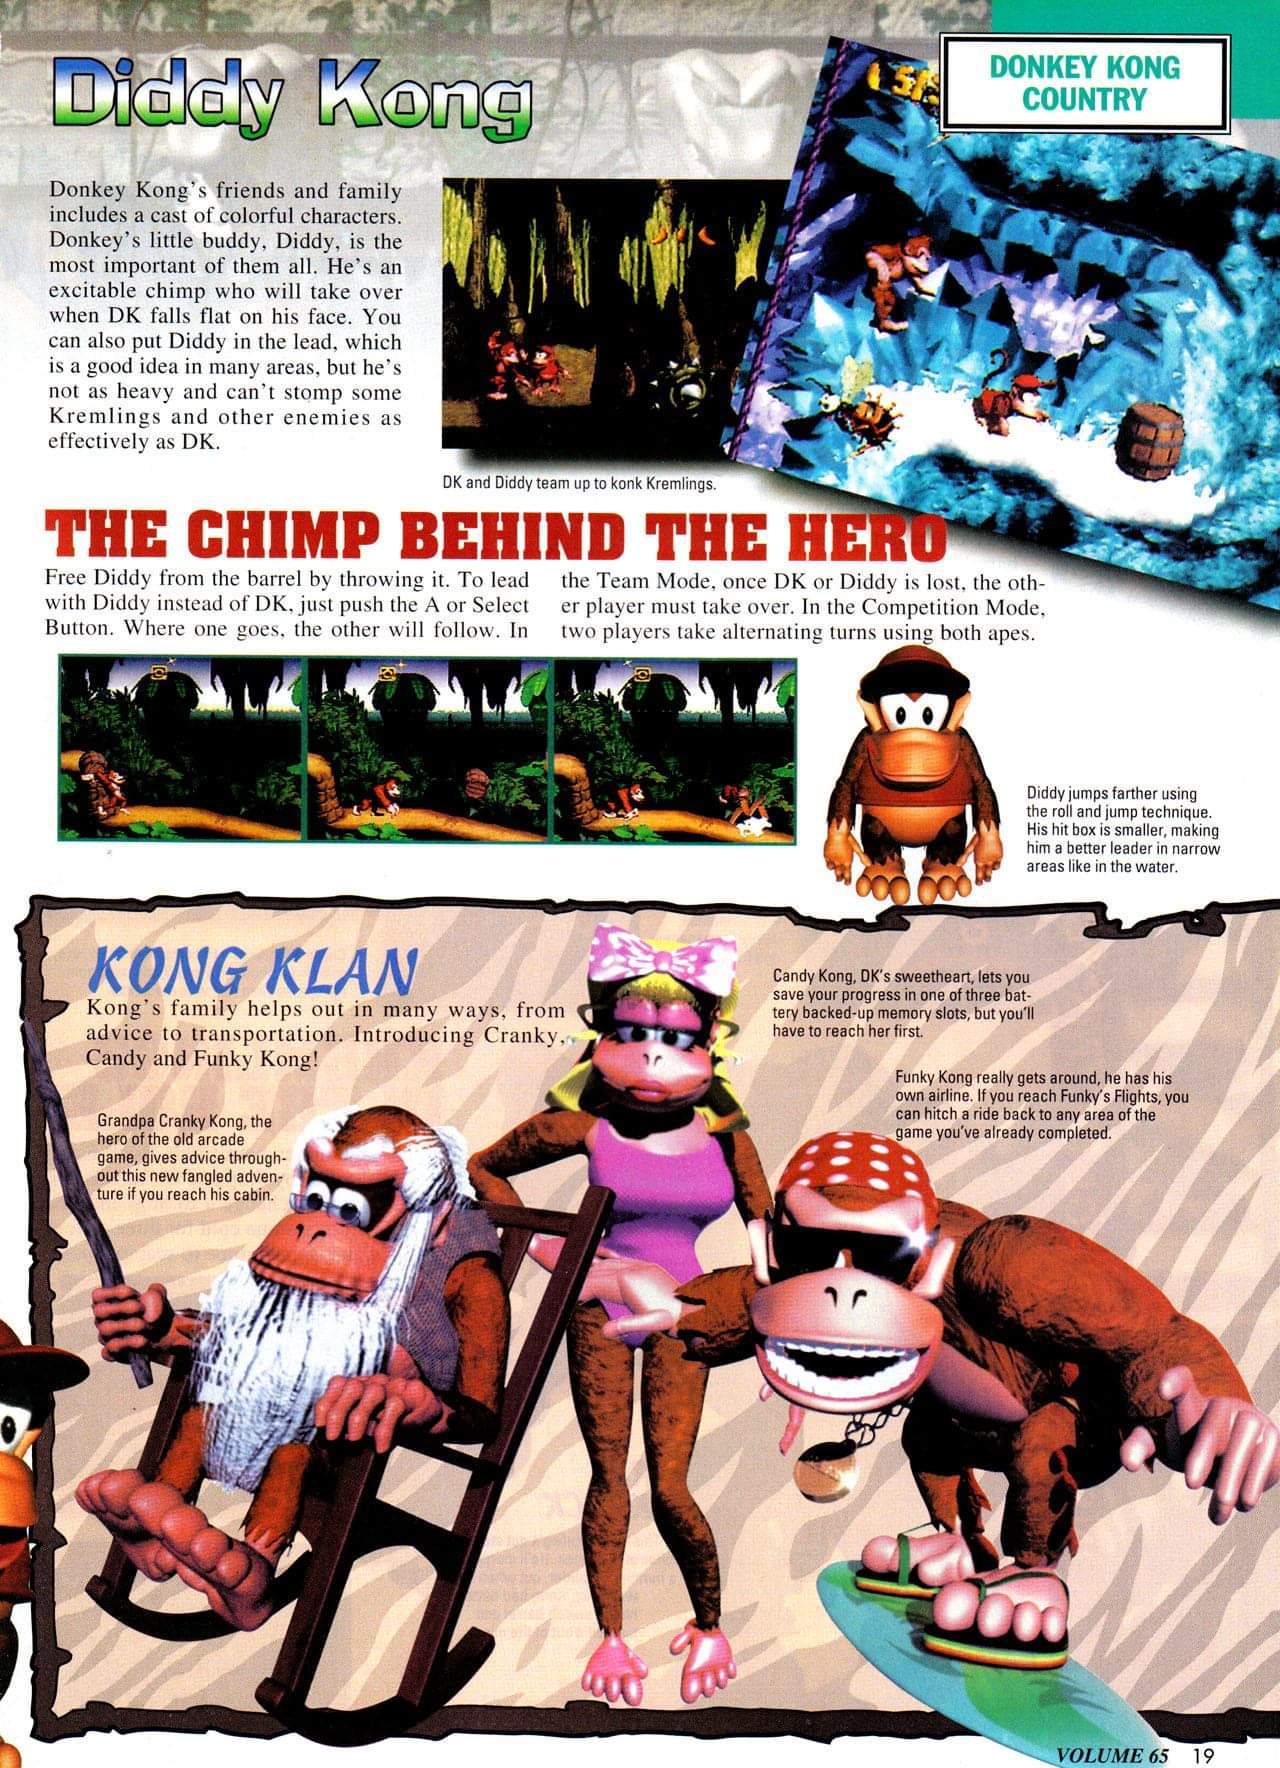 Is Diddy Kong Donkey Kong's son? - Quora